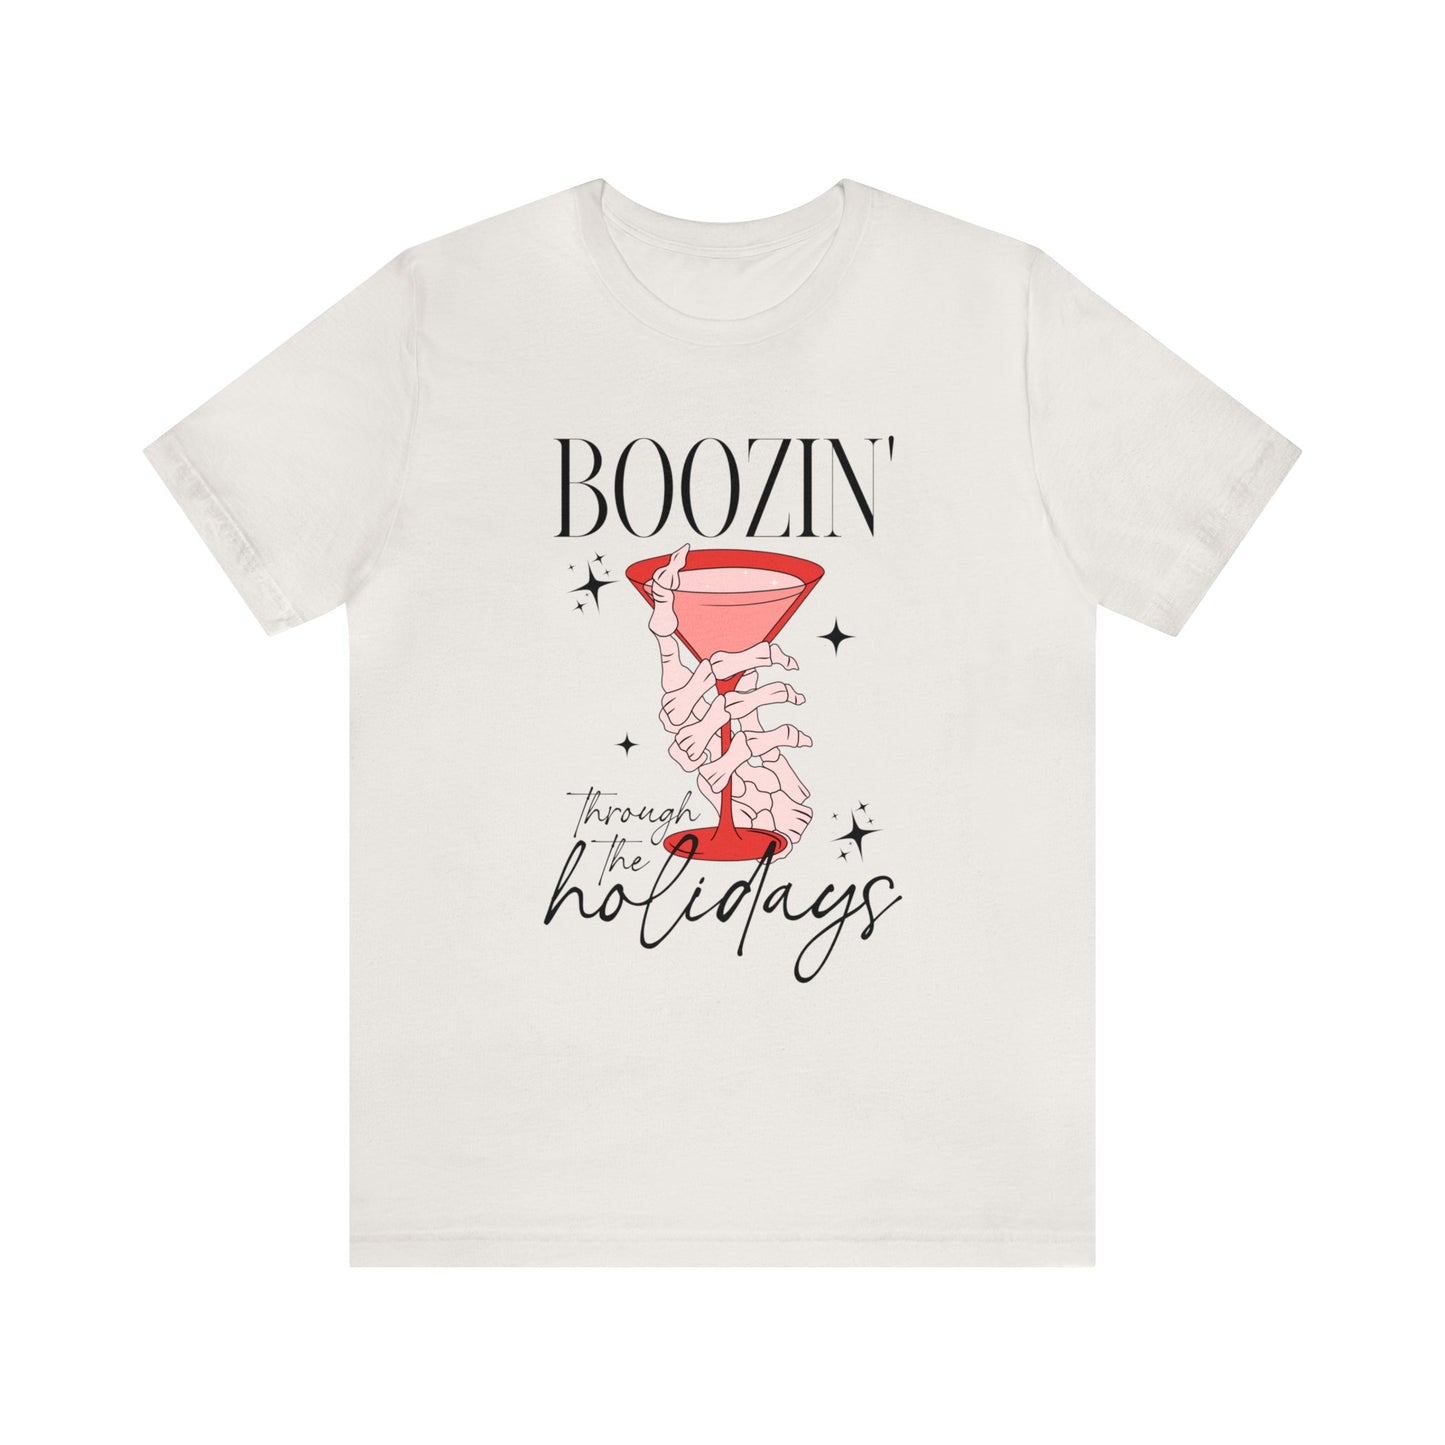 Boozin' Through the Holidays Graphic Tee - More Colors